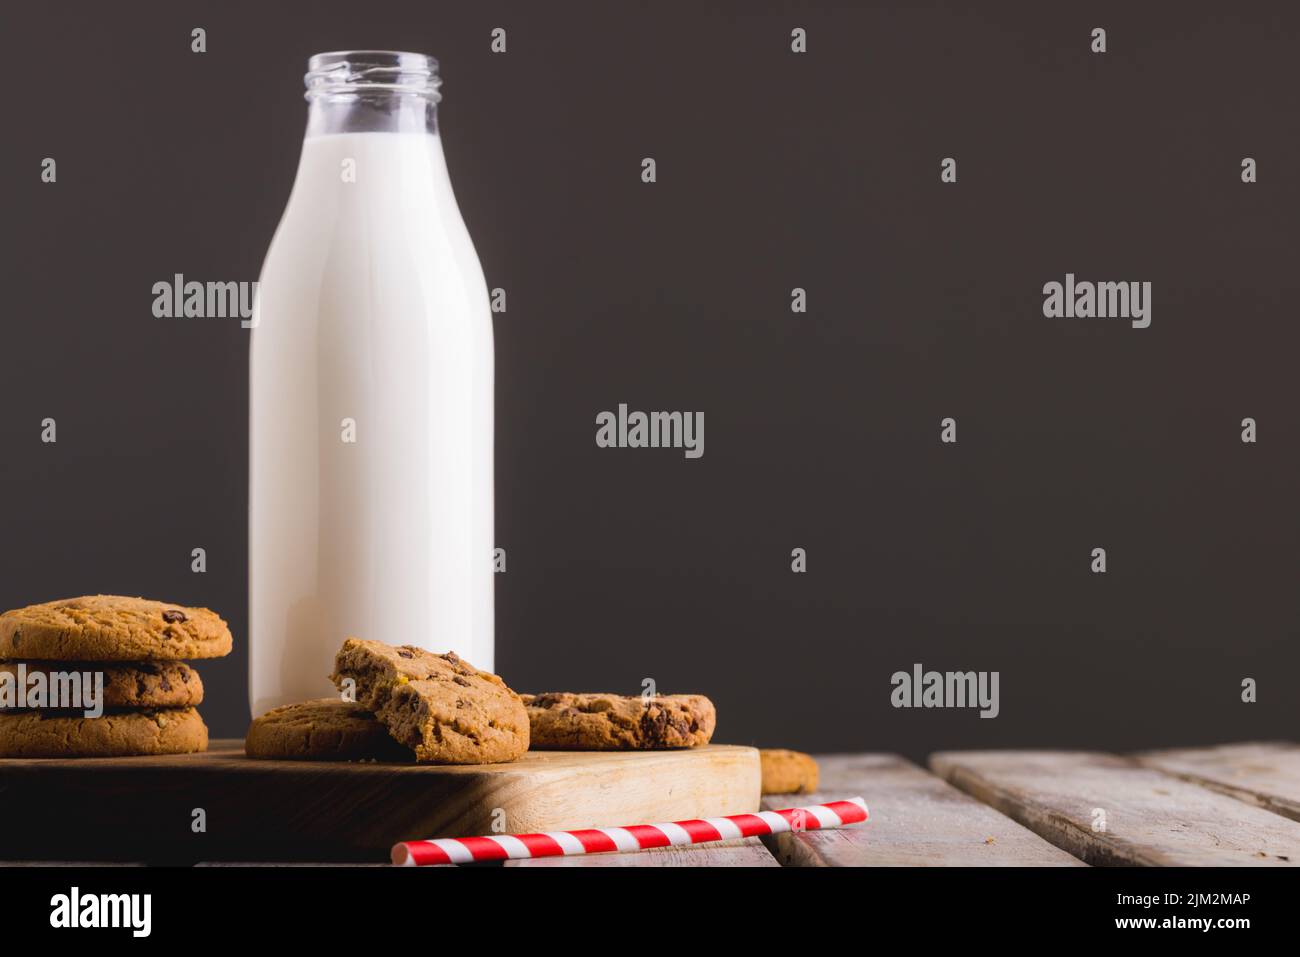 Milk bottle with cookies on table against gray background, copy space. unaltered, food, drink, studio shot and healthy food concept. Stock Photo